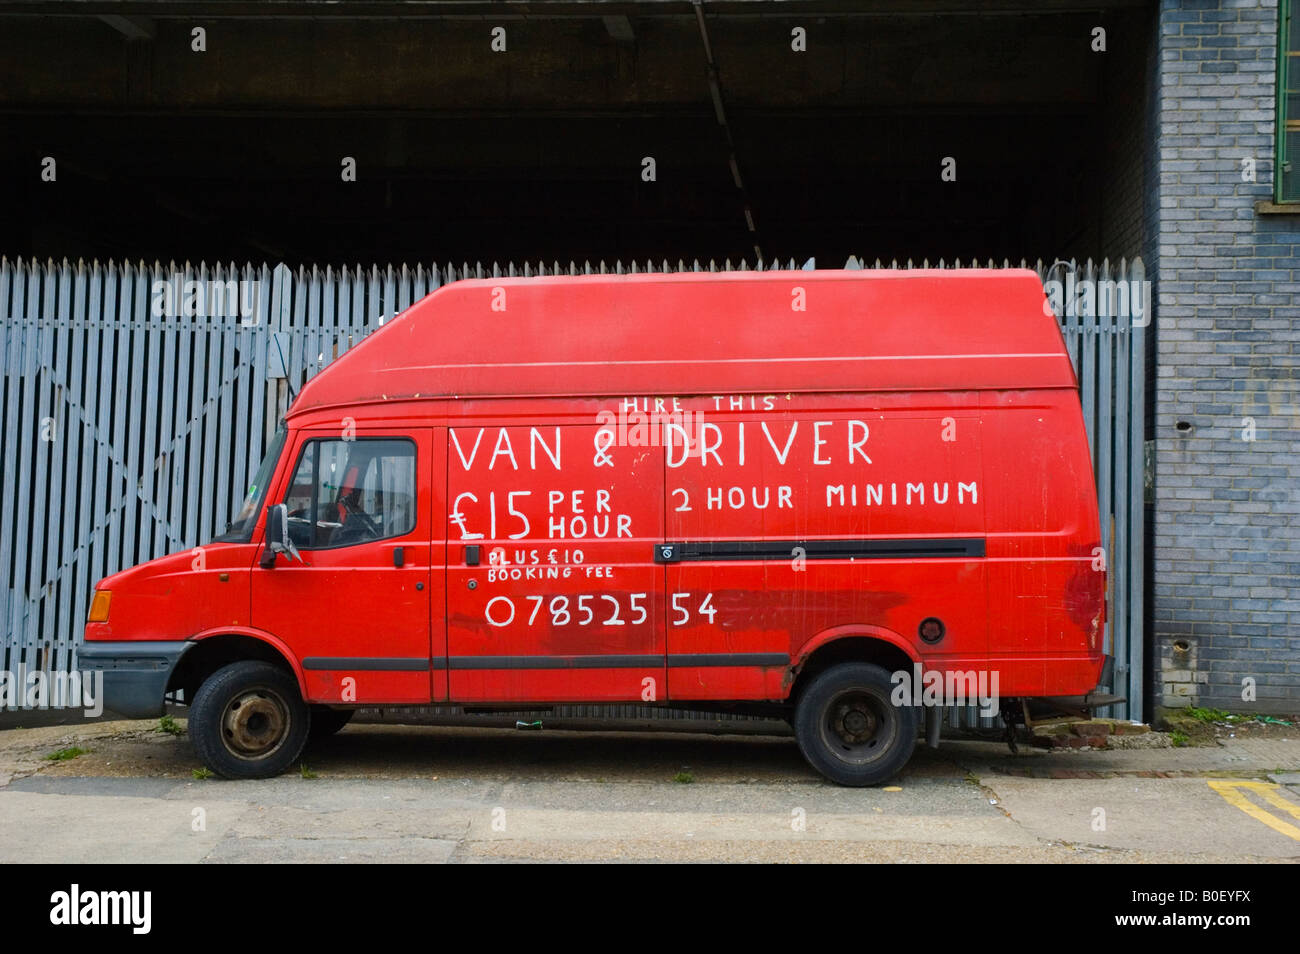 van hire for an hour